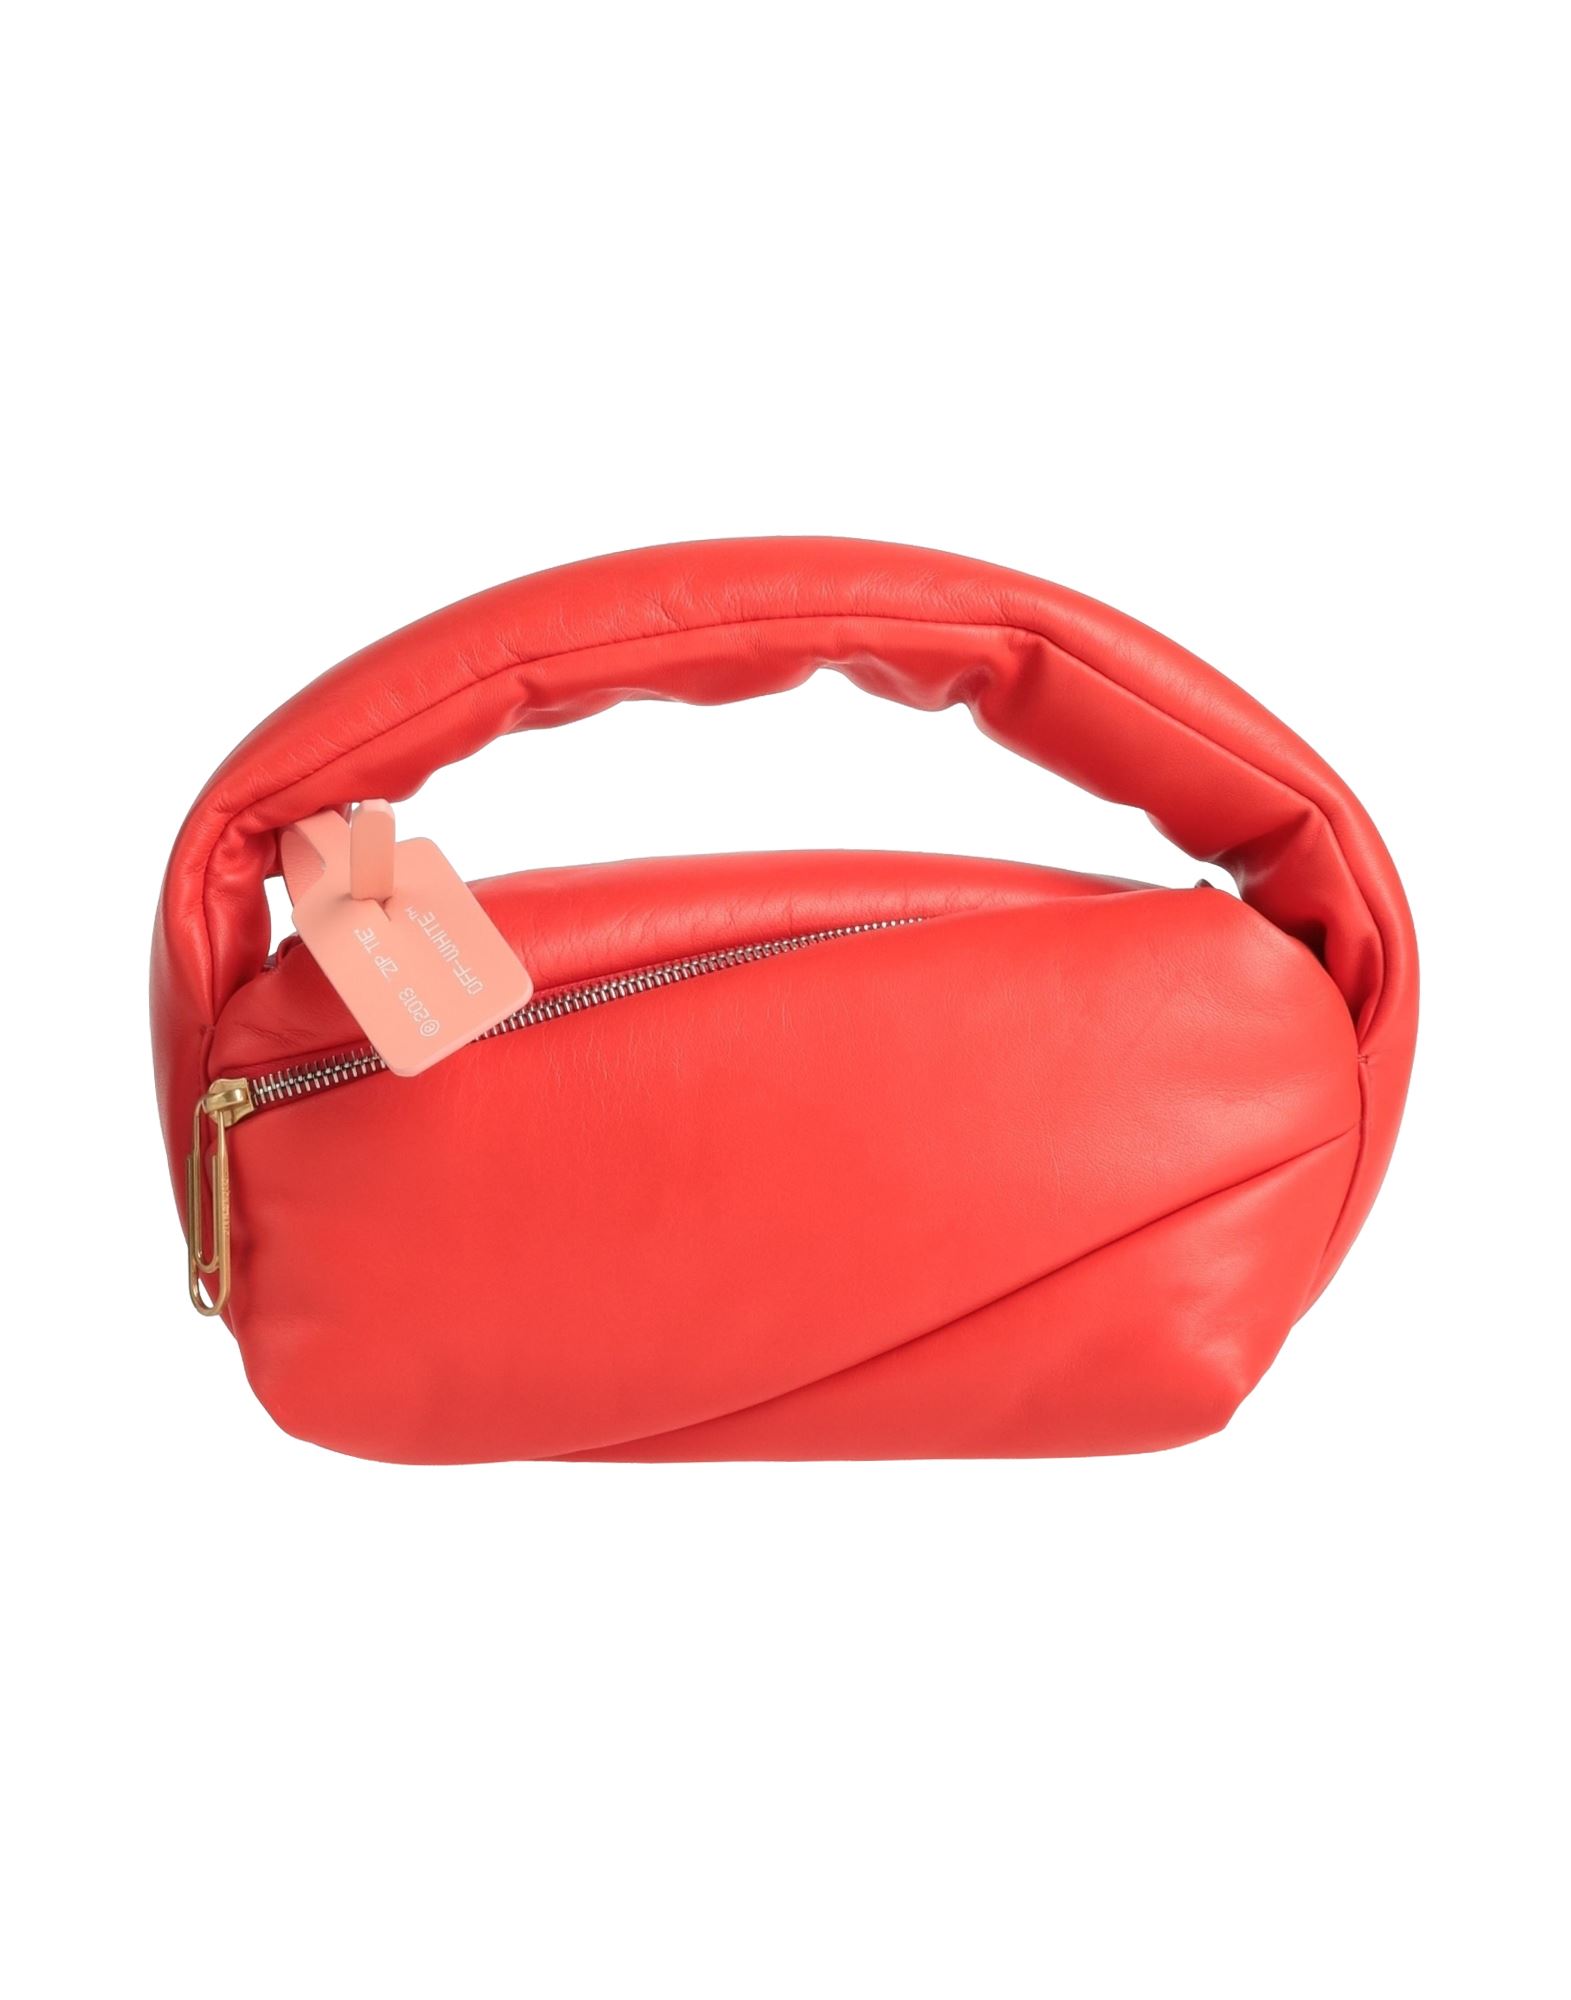 OFF-WHITE OFF-WHITE WOMAN HANDBAG RED SIZE - SOFT LEATHER